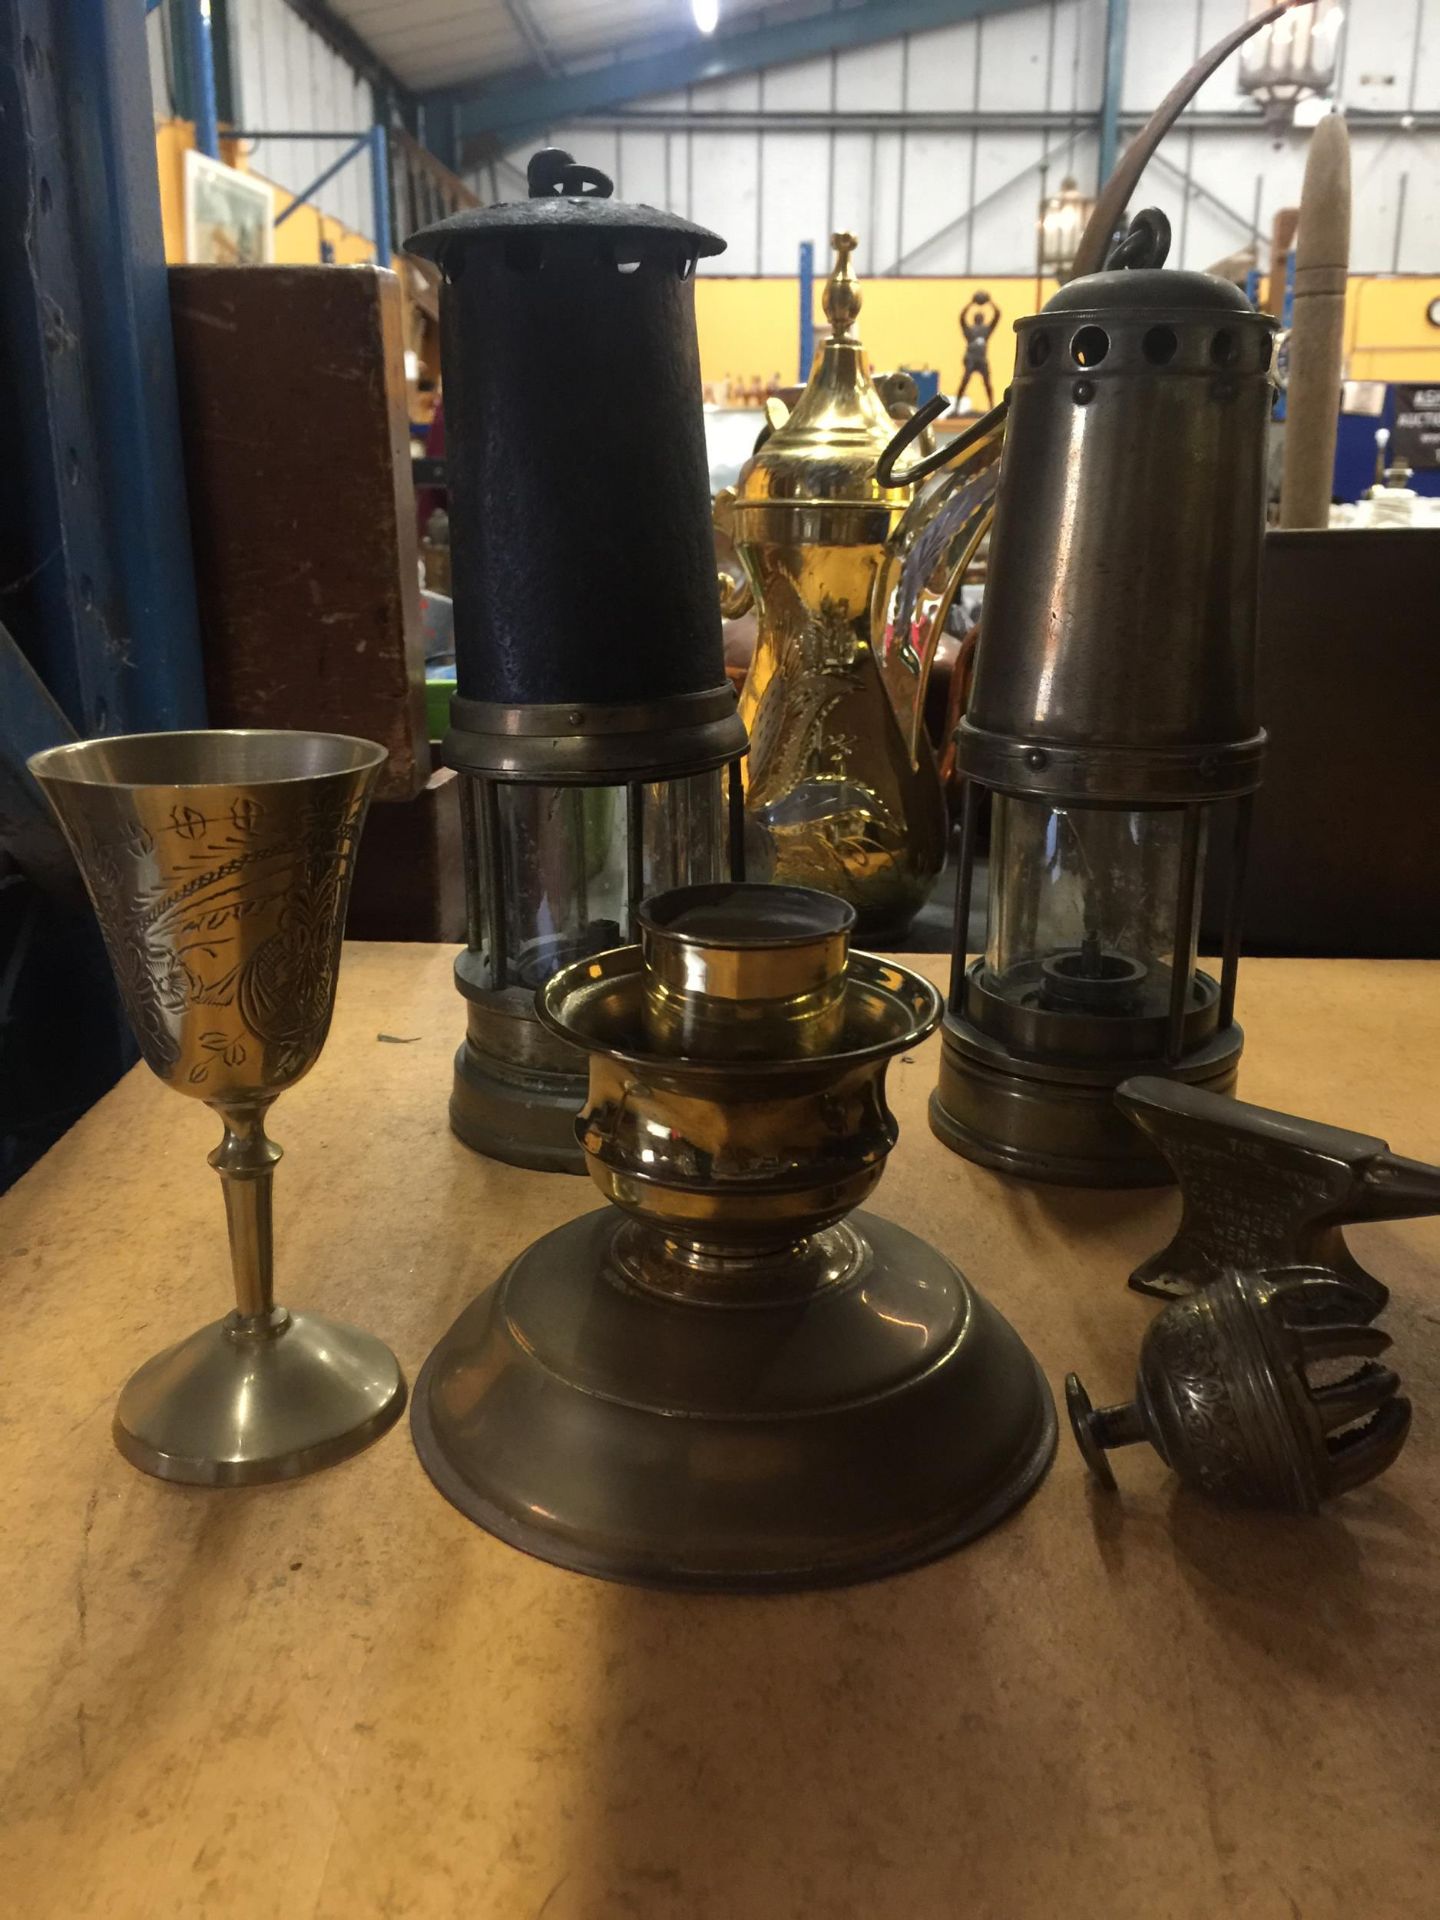 TWO VINTAGE MINERS LAMPS, A BRASS CANDLESTICK, SMALL ANVIL, ASIAN PRAYER BELL, ETC